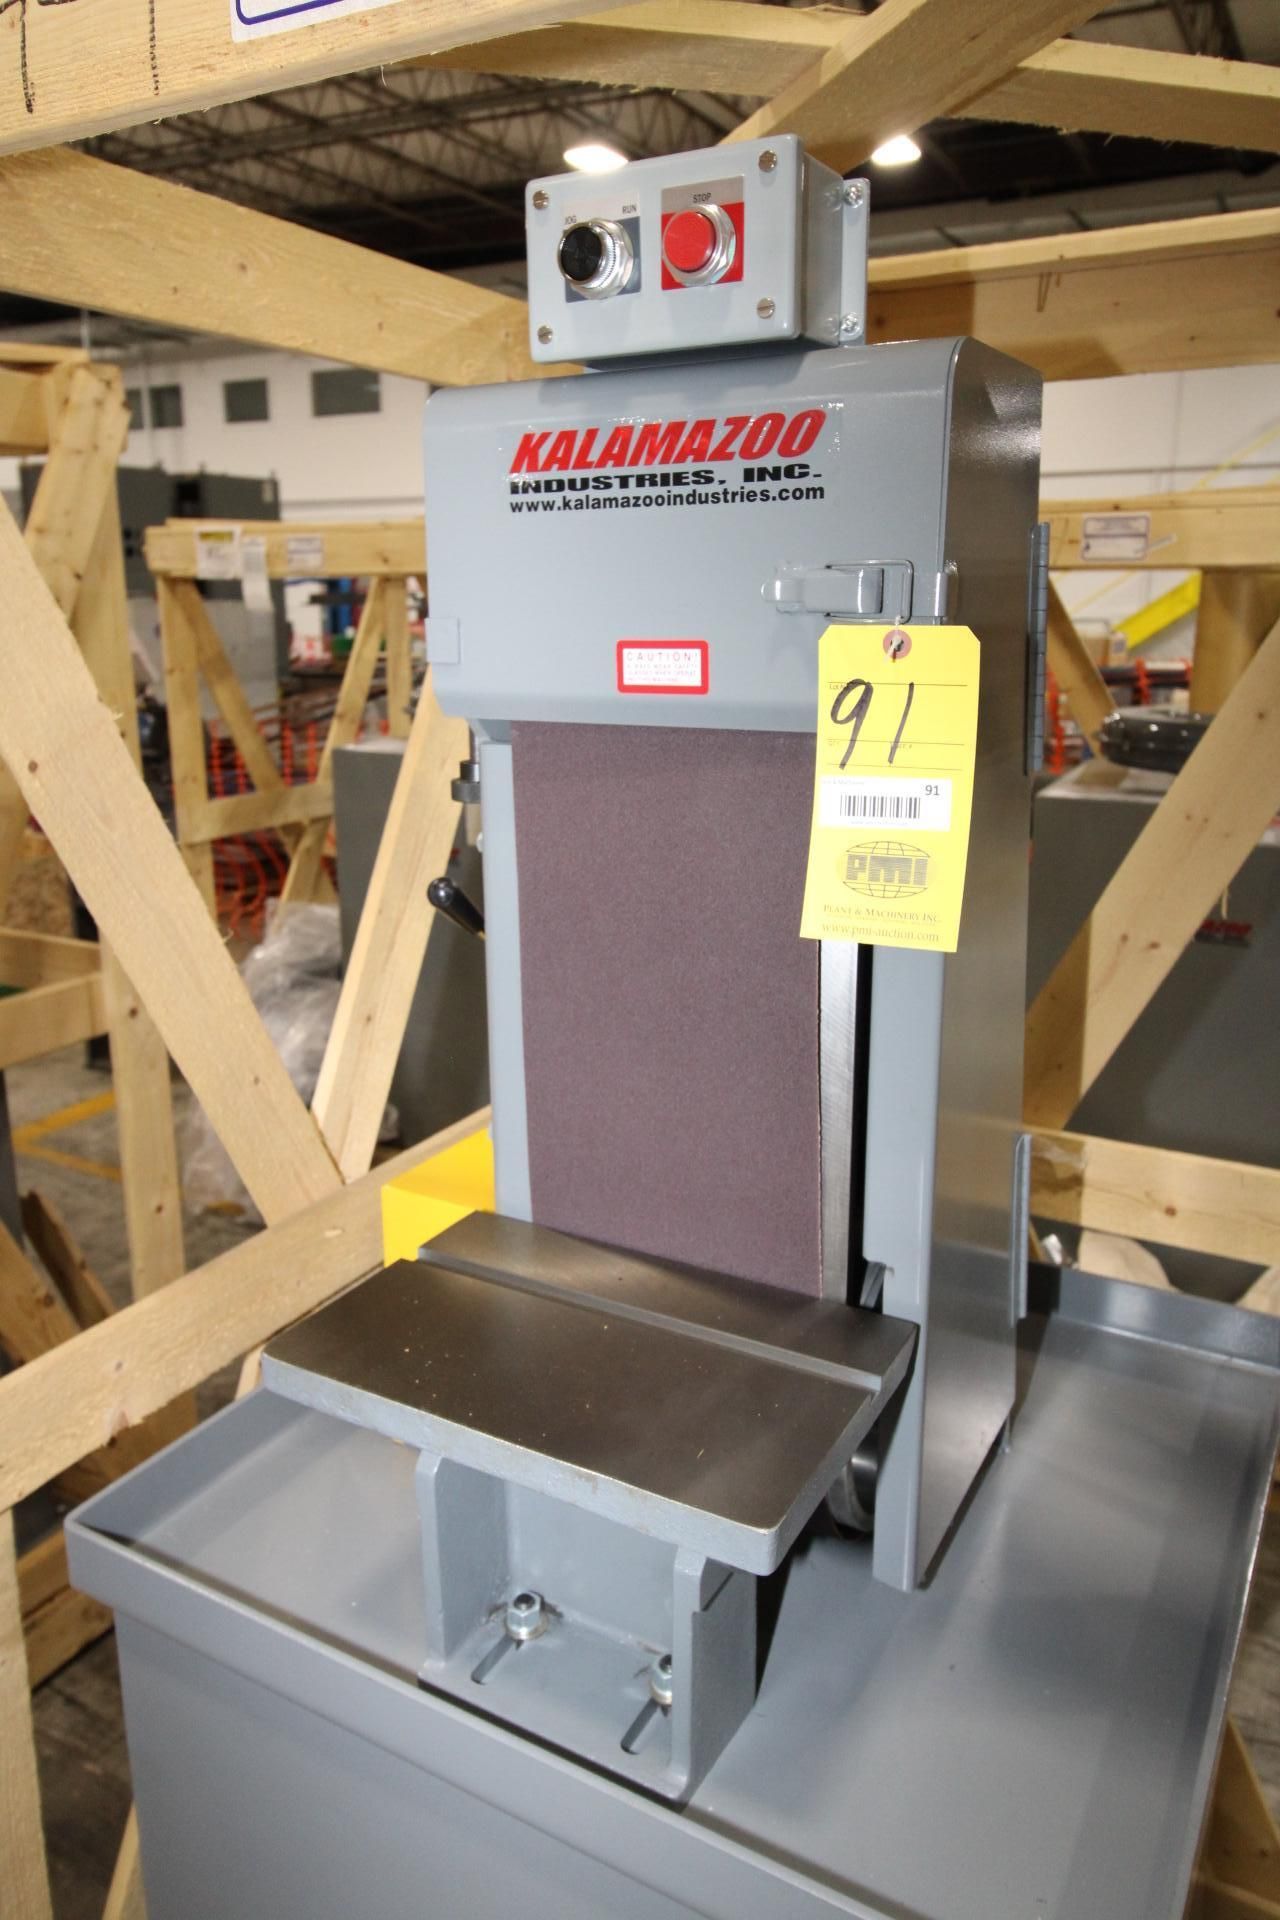 INDUSTRIAL SANDERS W/ DUST COLLECTOR, KALAMAZOO S8D, 8” x 60”, 7.5 HP, w/ dust collection system, - Image 5 of 8